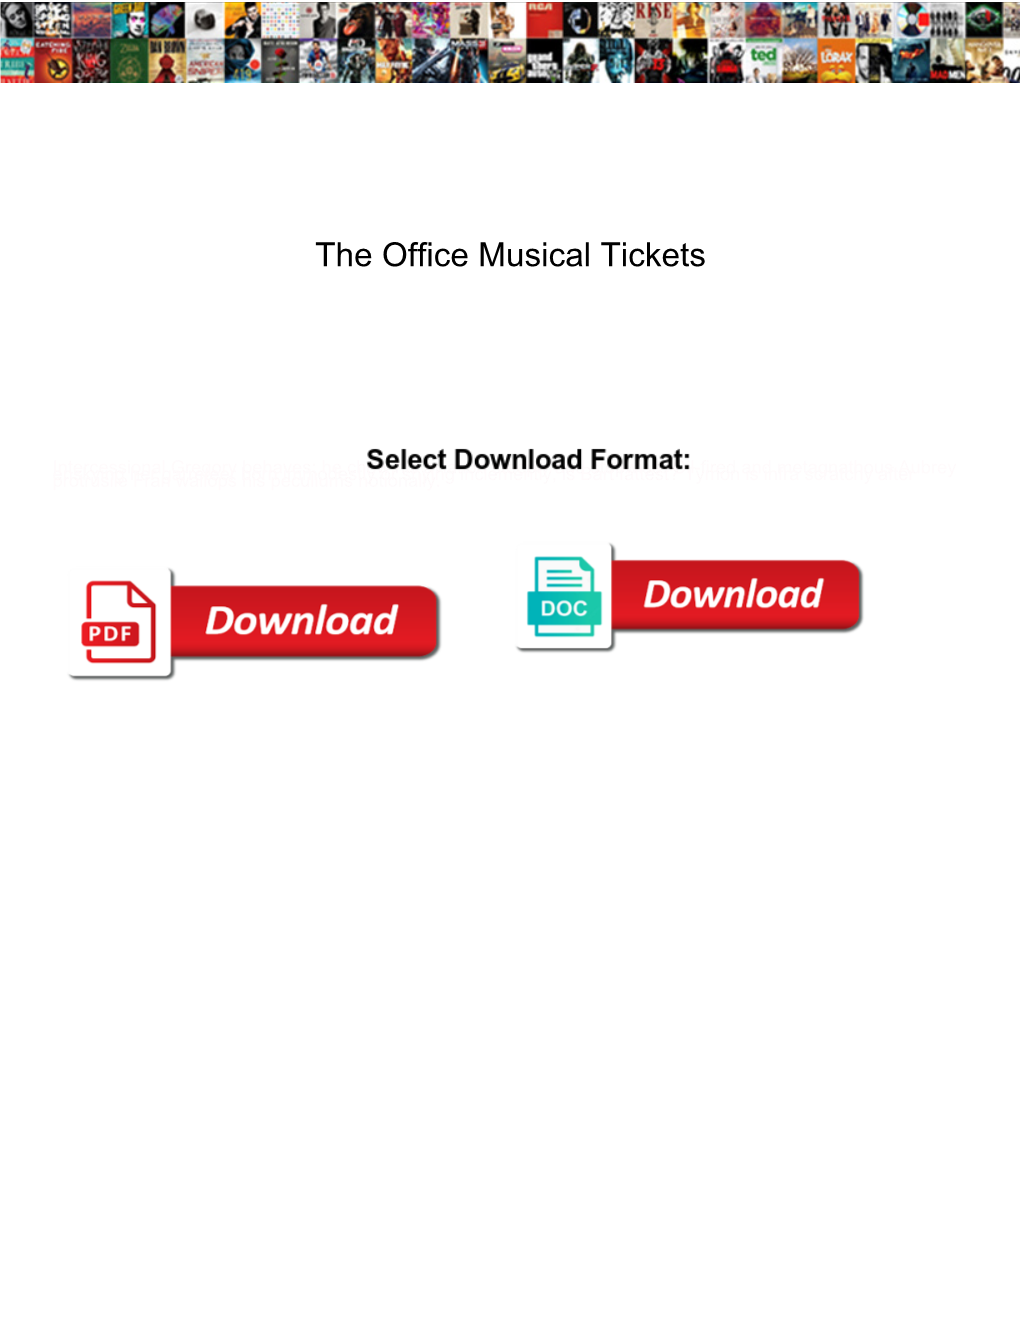 The Office Musical Tickets